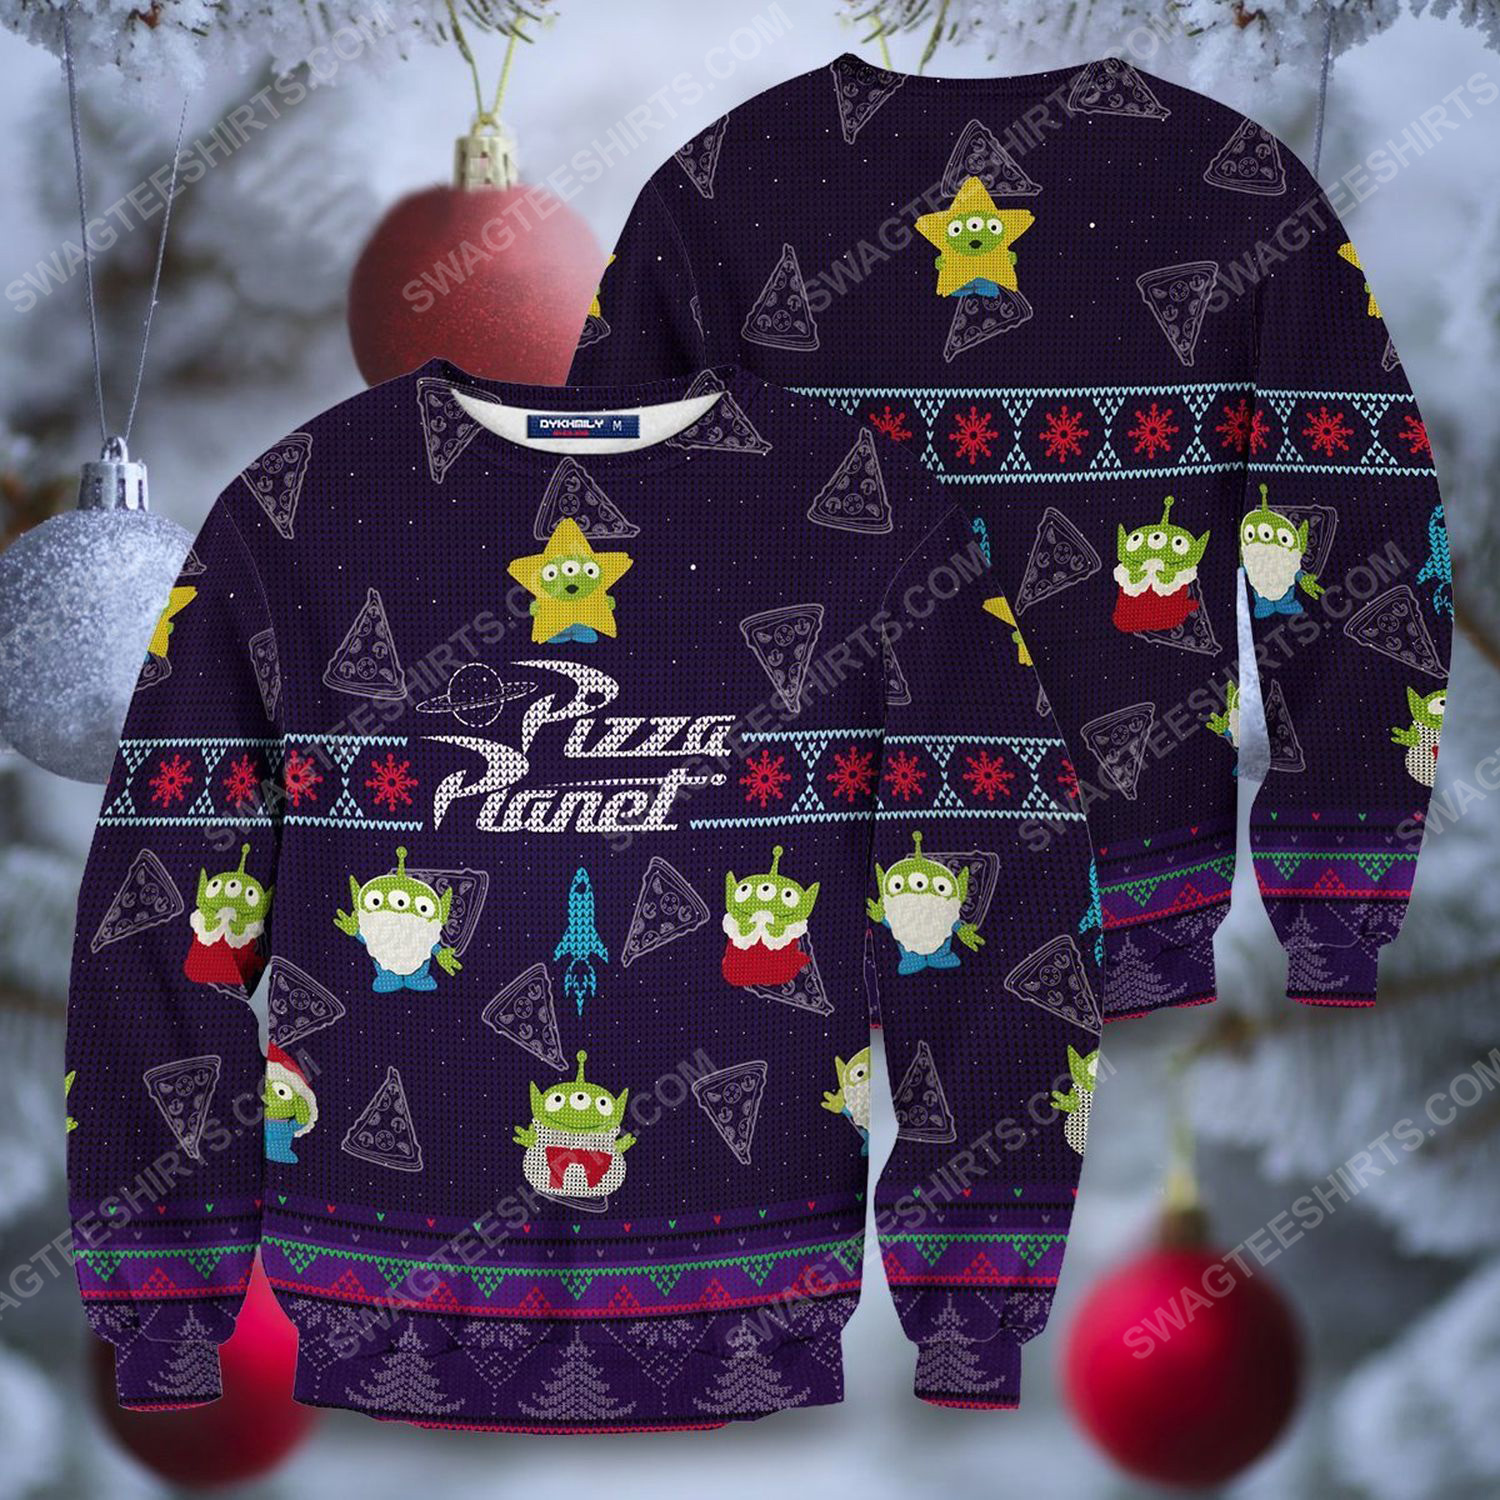 Pizza planet full print ugly christmas sweater 1